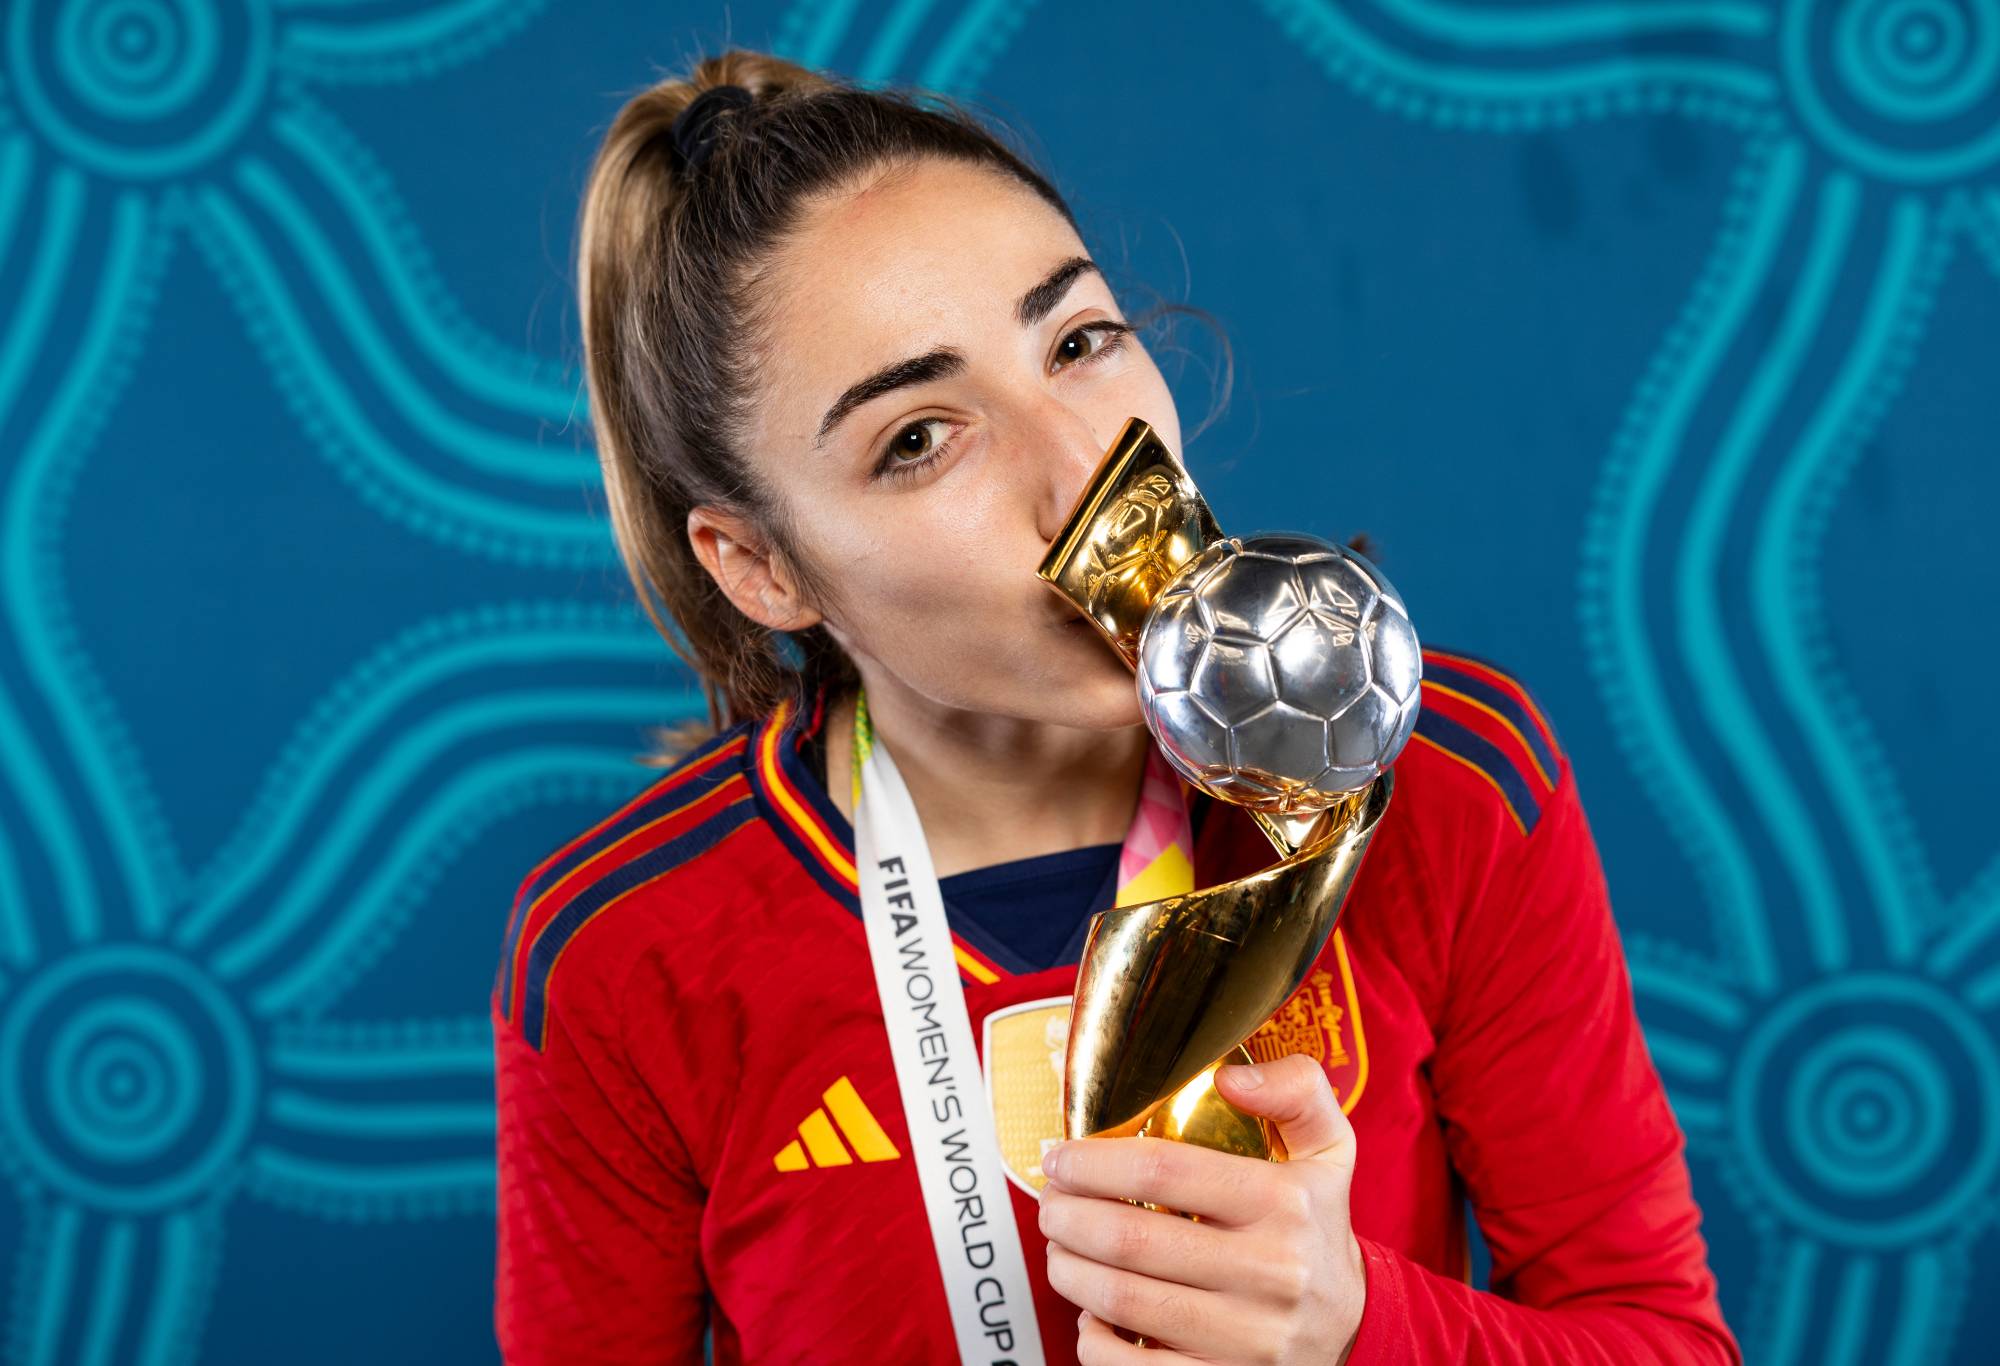 Olga Carmona of Spain poses with the FIFA Women's World Cup Australia & New Zealand 2023 trophy after victory in the FIFA Women's World Cup Australia & New Zealand 2023 Final match between Spain and England at Stadium Australia on August 20, 2023 in Sydney / Gadigal, Australia. (Photo by Maddie Meyer - FIFA/FIFA via Getty Images)